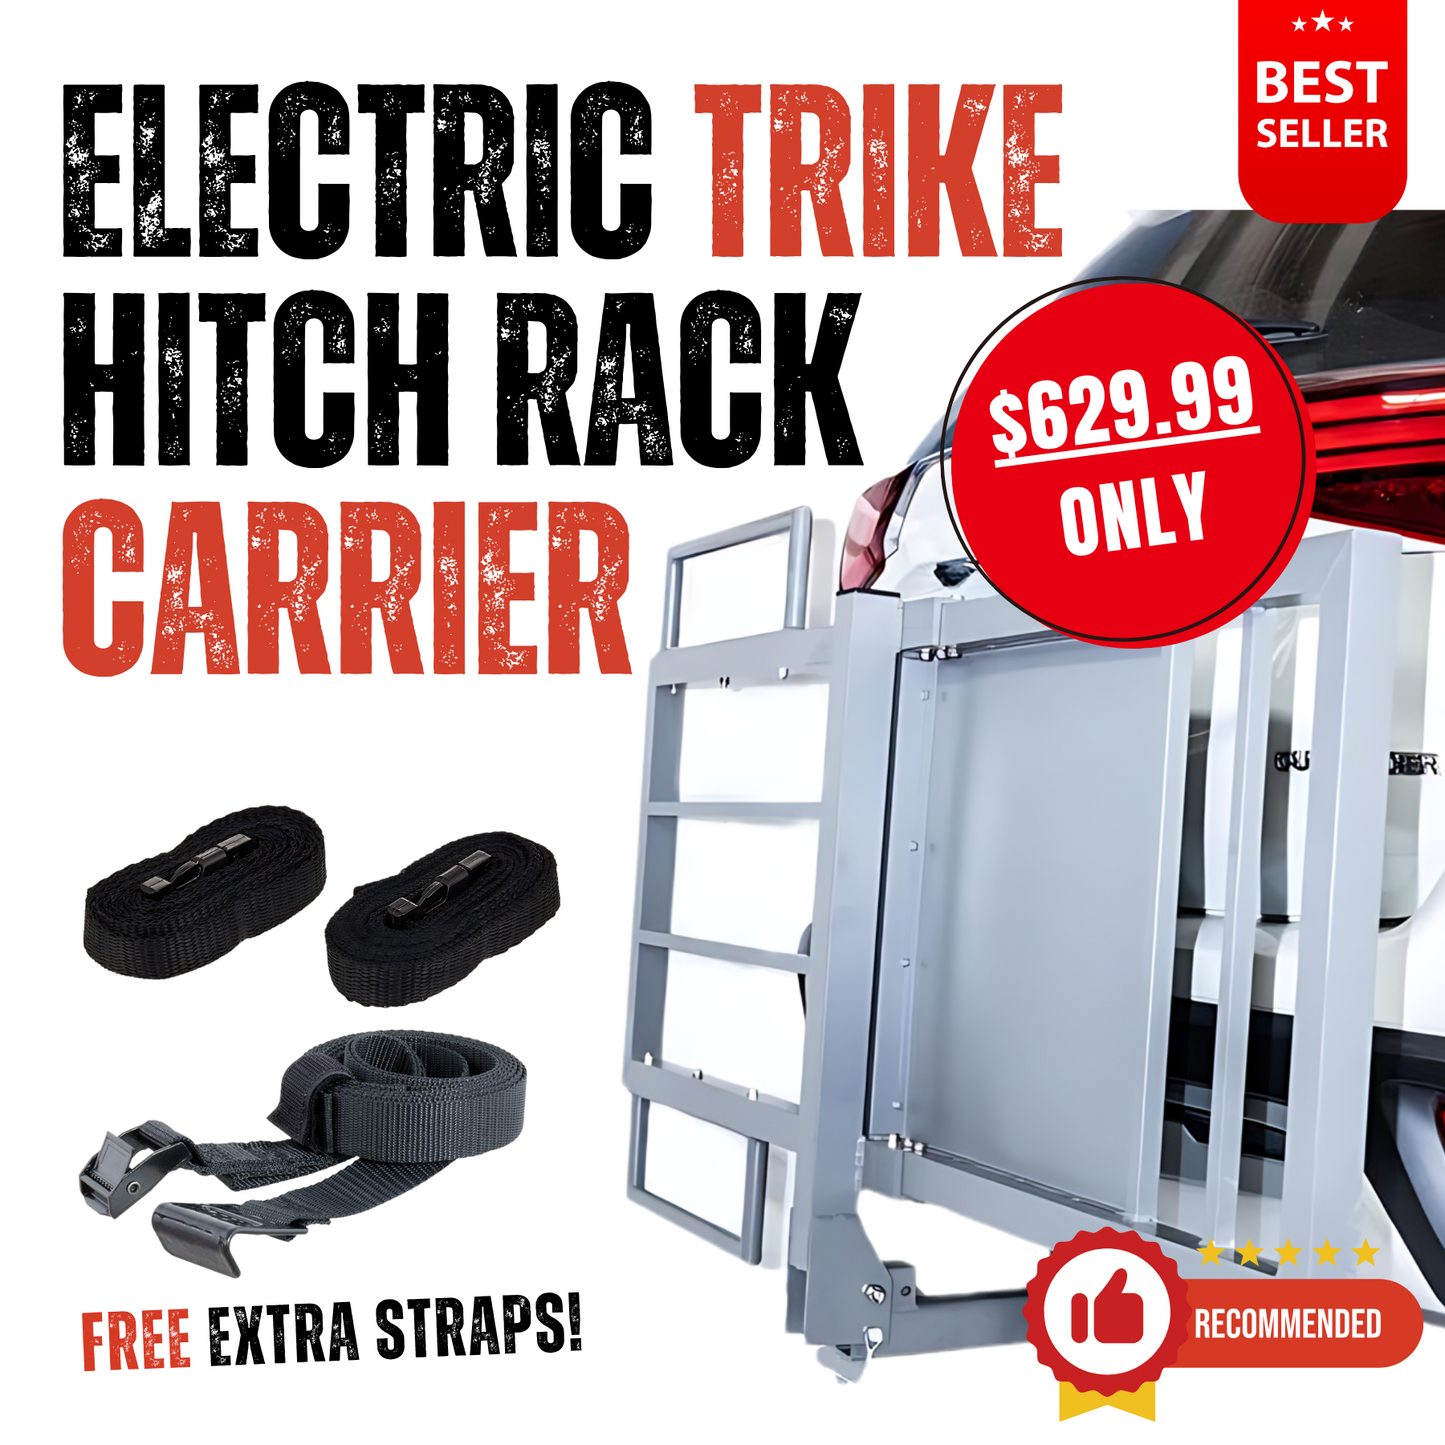 The Electric Trike Hitch Rack Carrier